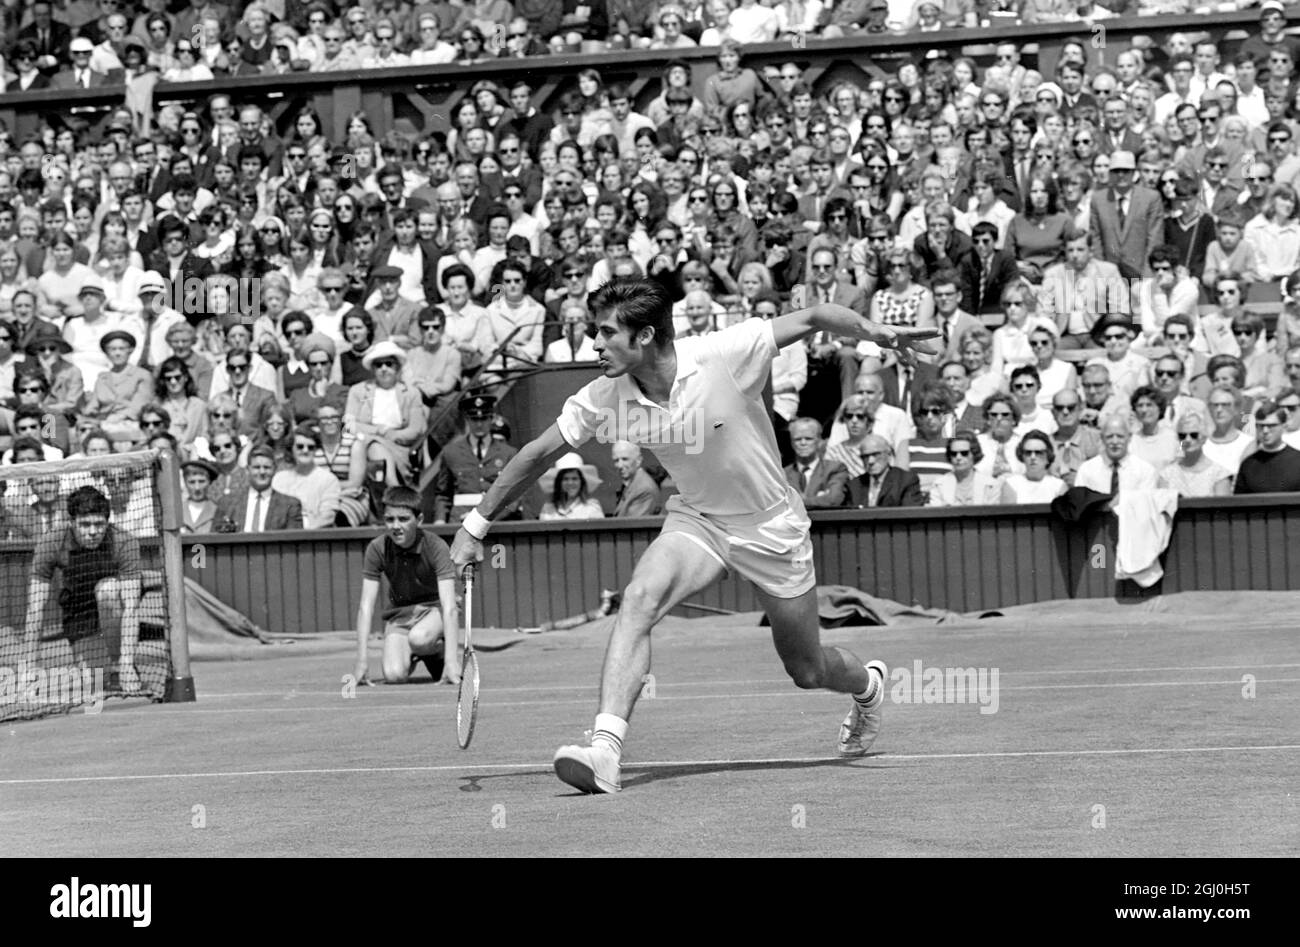 London: Charles Pasqarell, of Puerto Rico, in action against Pancho Gonzales, of Los Angeles, in the Mens Singles of the Wimbledon Tennis Championships. 25 June 1969 Stock Photo